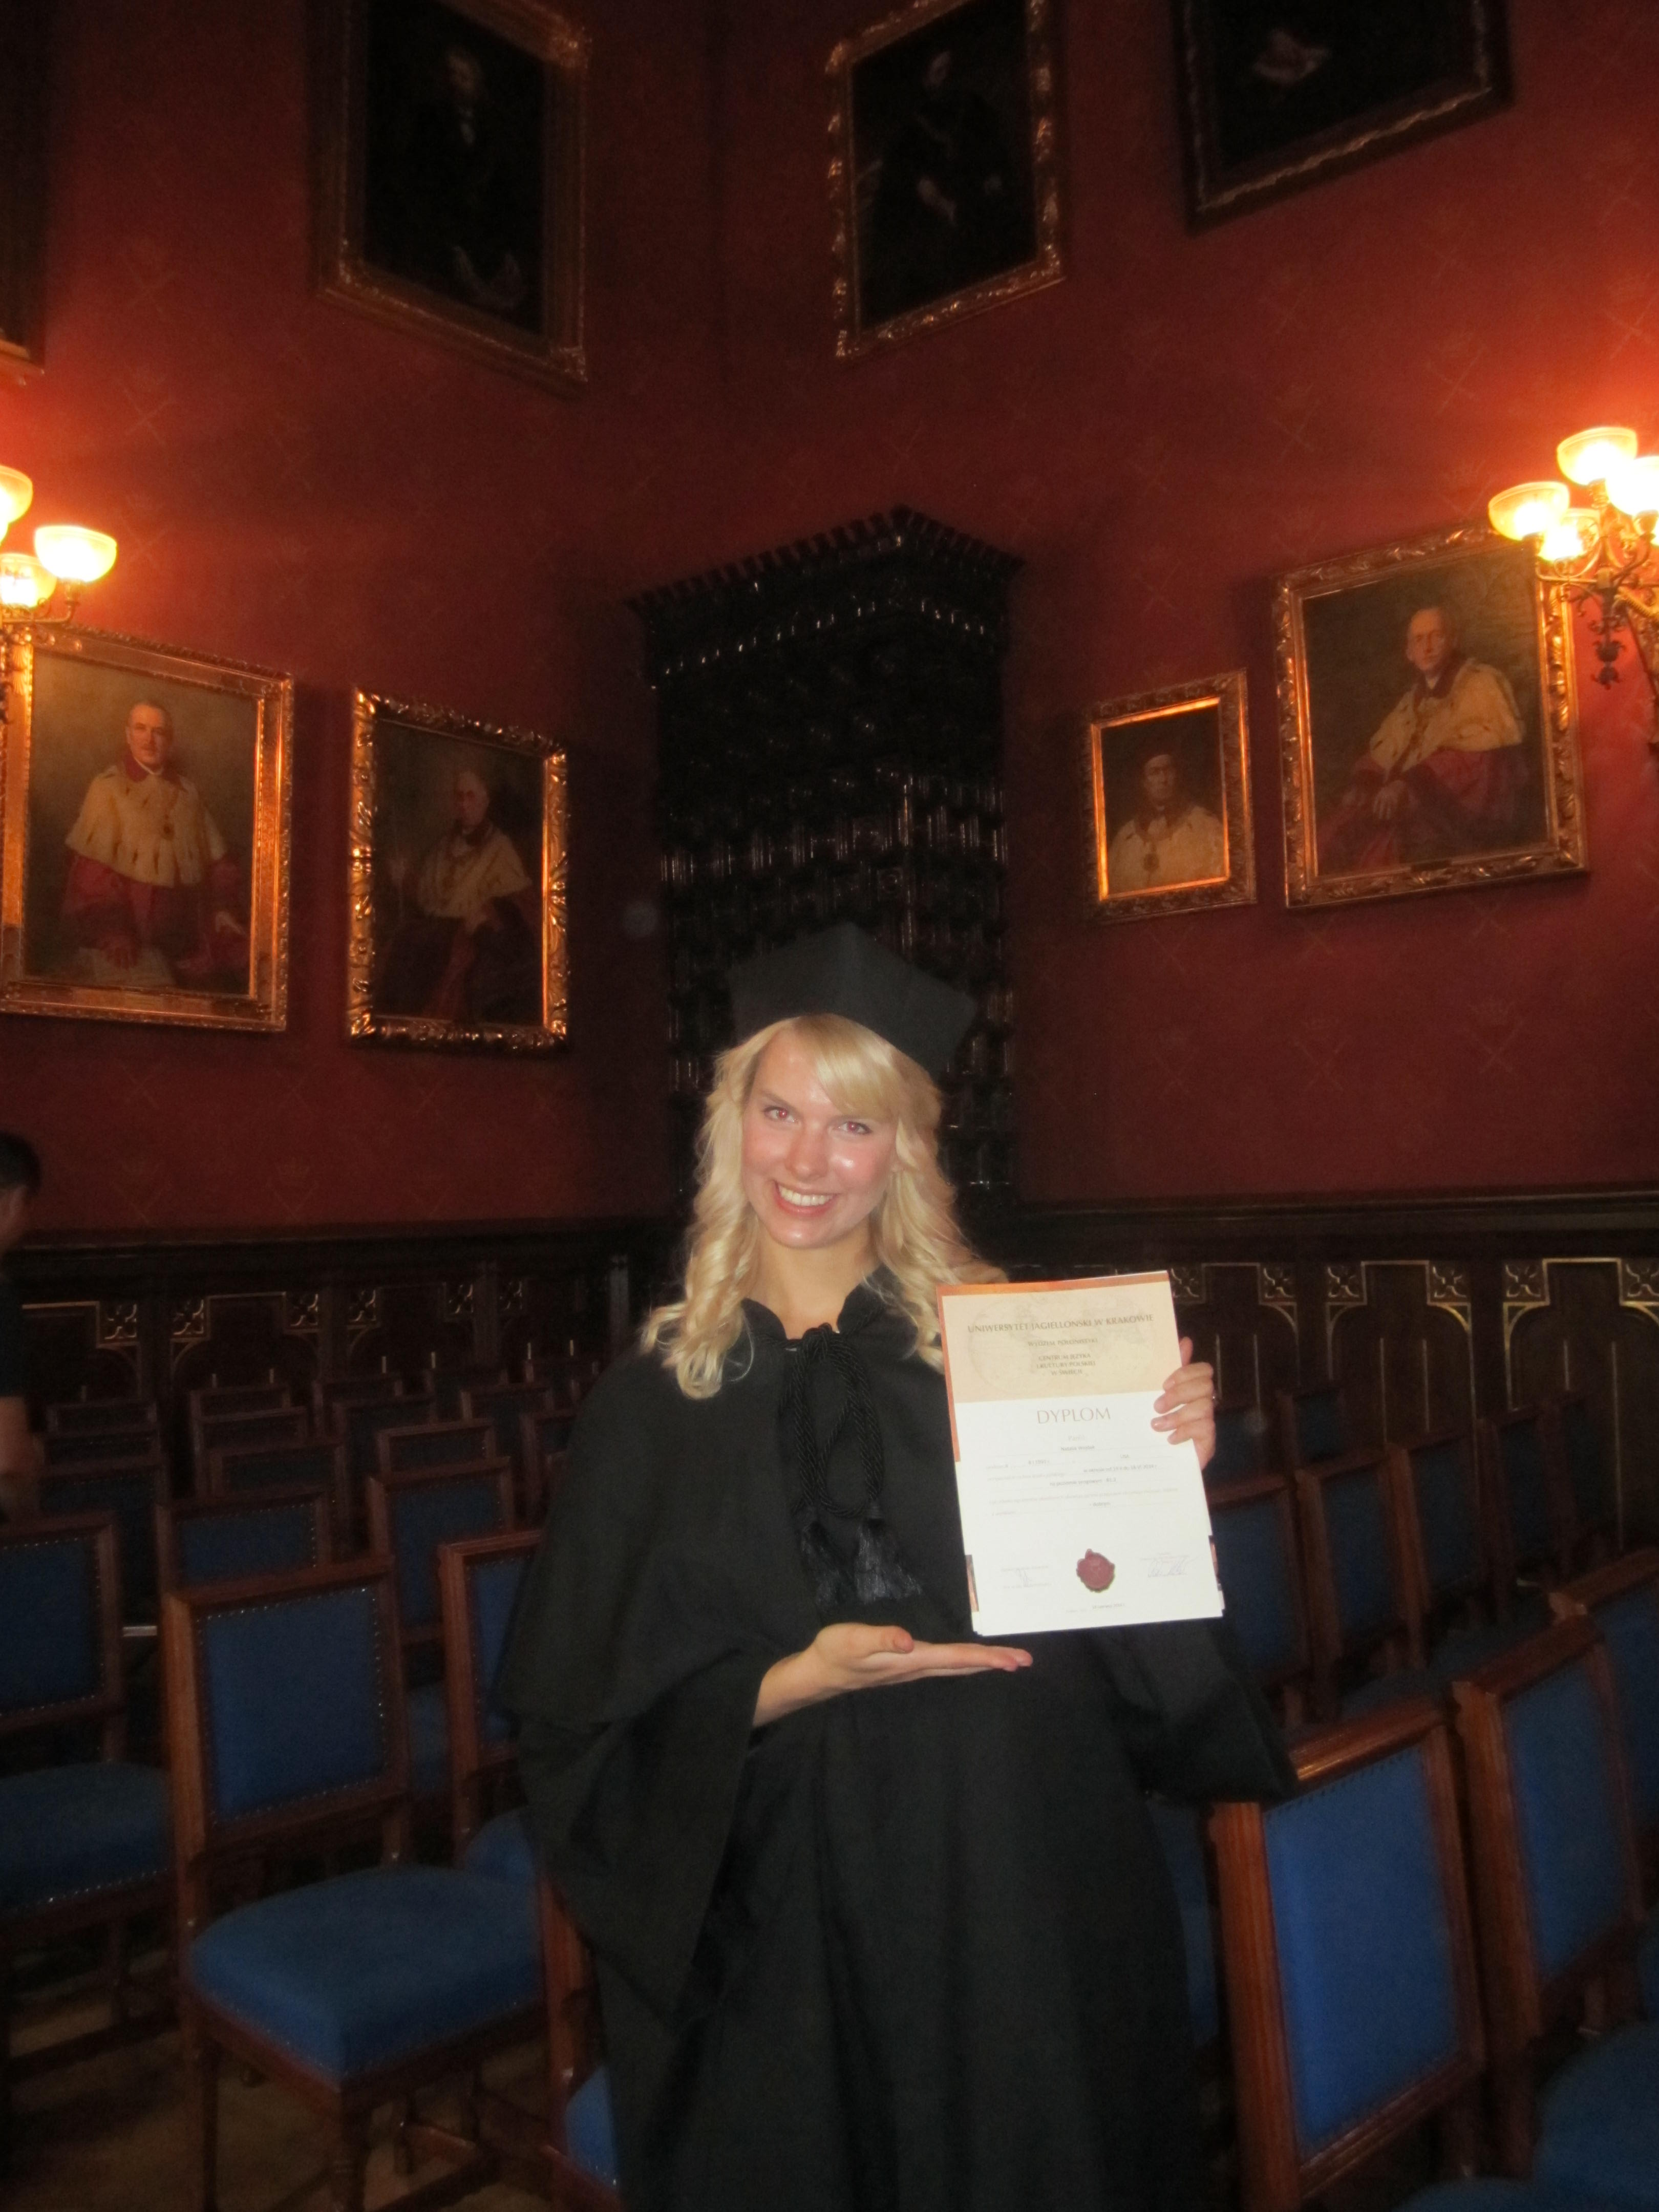 KF scholar receives a diploma from the Jagiellonian University, Center of Polish Language and Culture, Krakow.